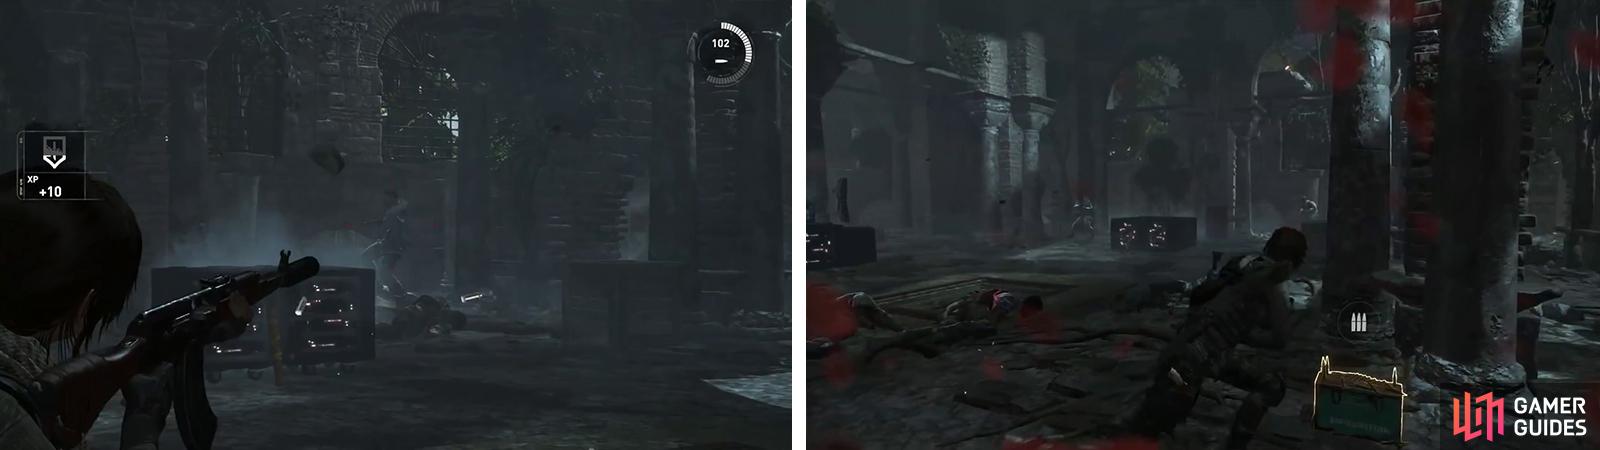 In the final room, youll be able to attack three enemies first (left) before waves of enemies will stream into the room (right).